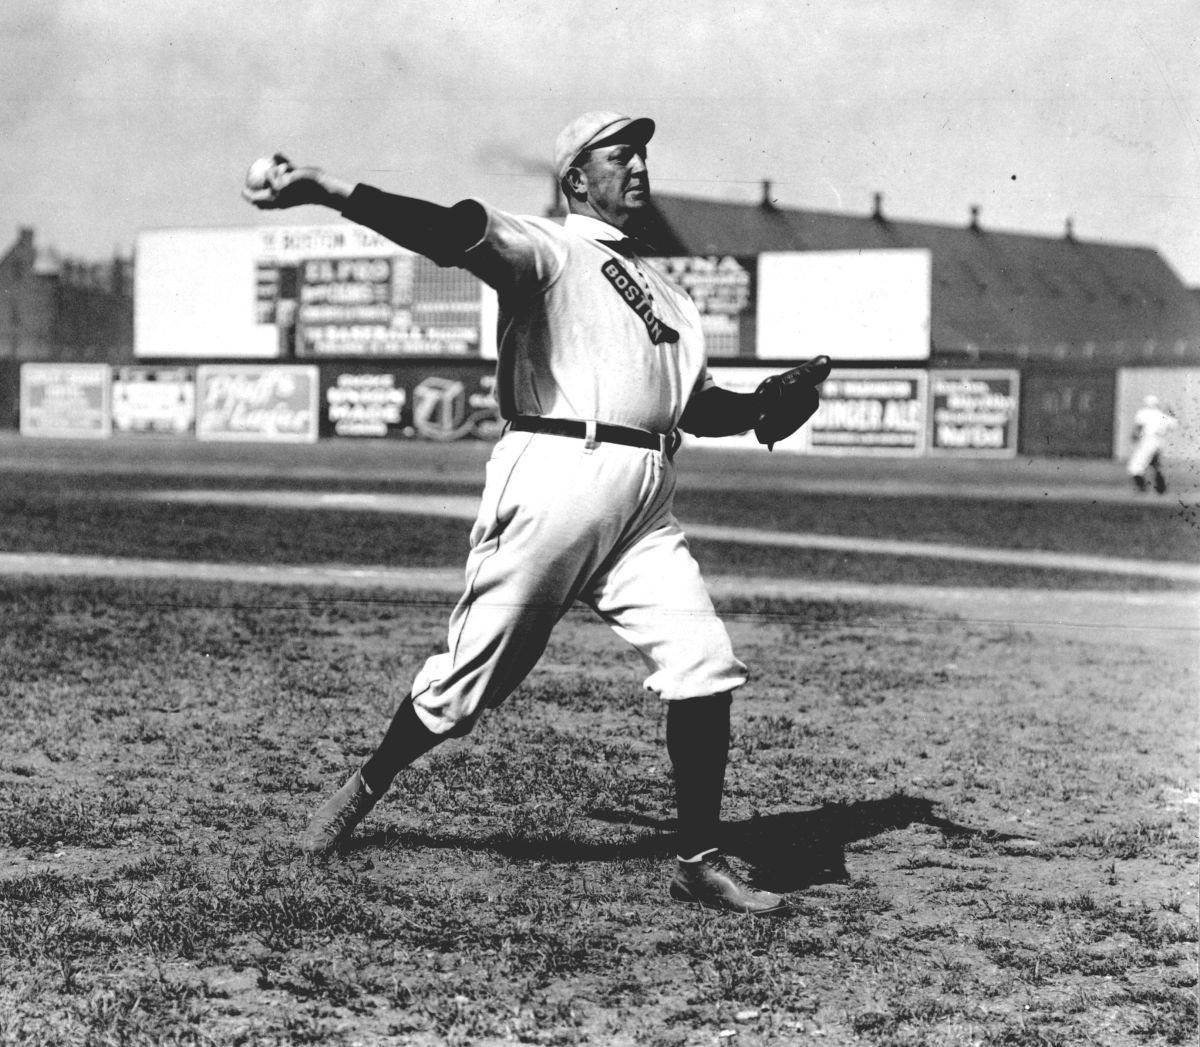 Cy Young Won 511 Games As a Pitcher